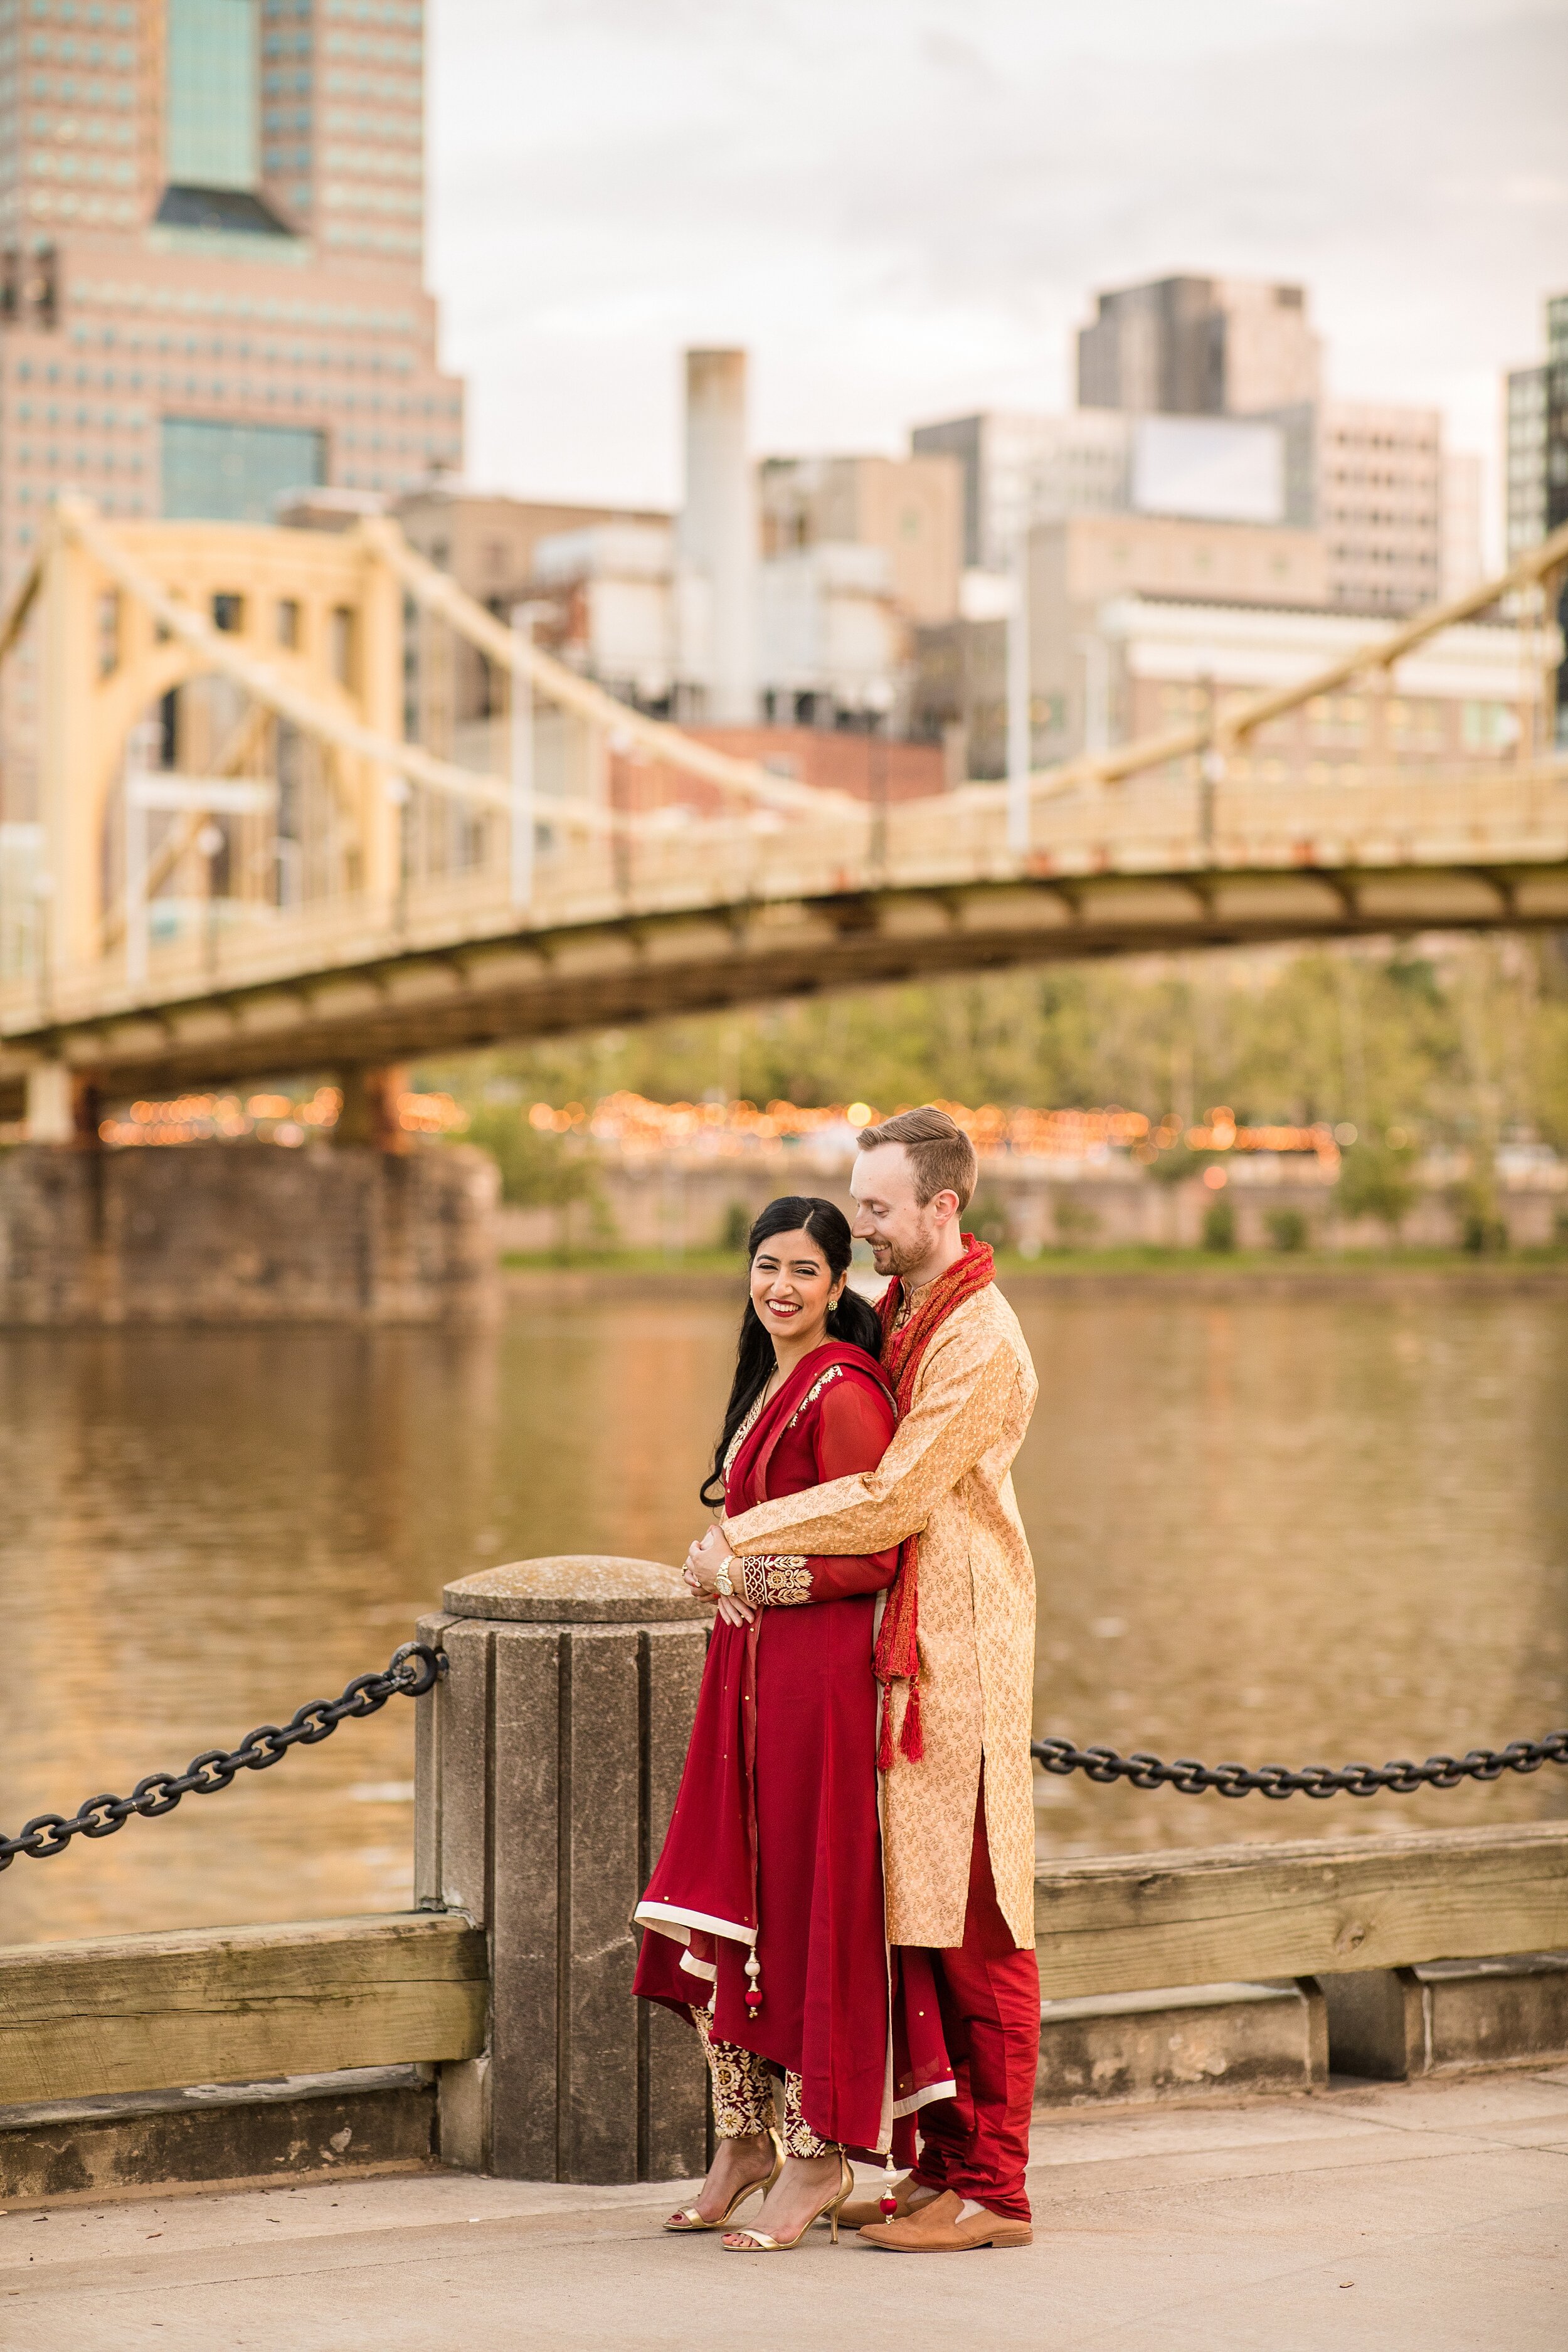 pittsburgh engagement photos, locations for engagement photos pittsburgh, mexican war streets engagement photos, north shore pittsburgh engagement photos, allegheny commons park